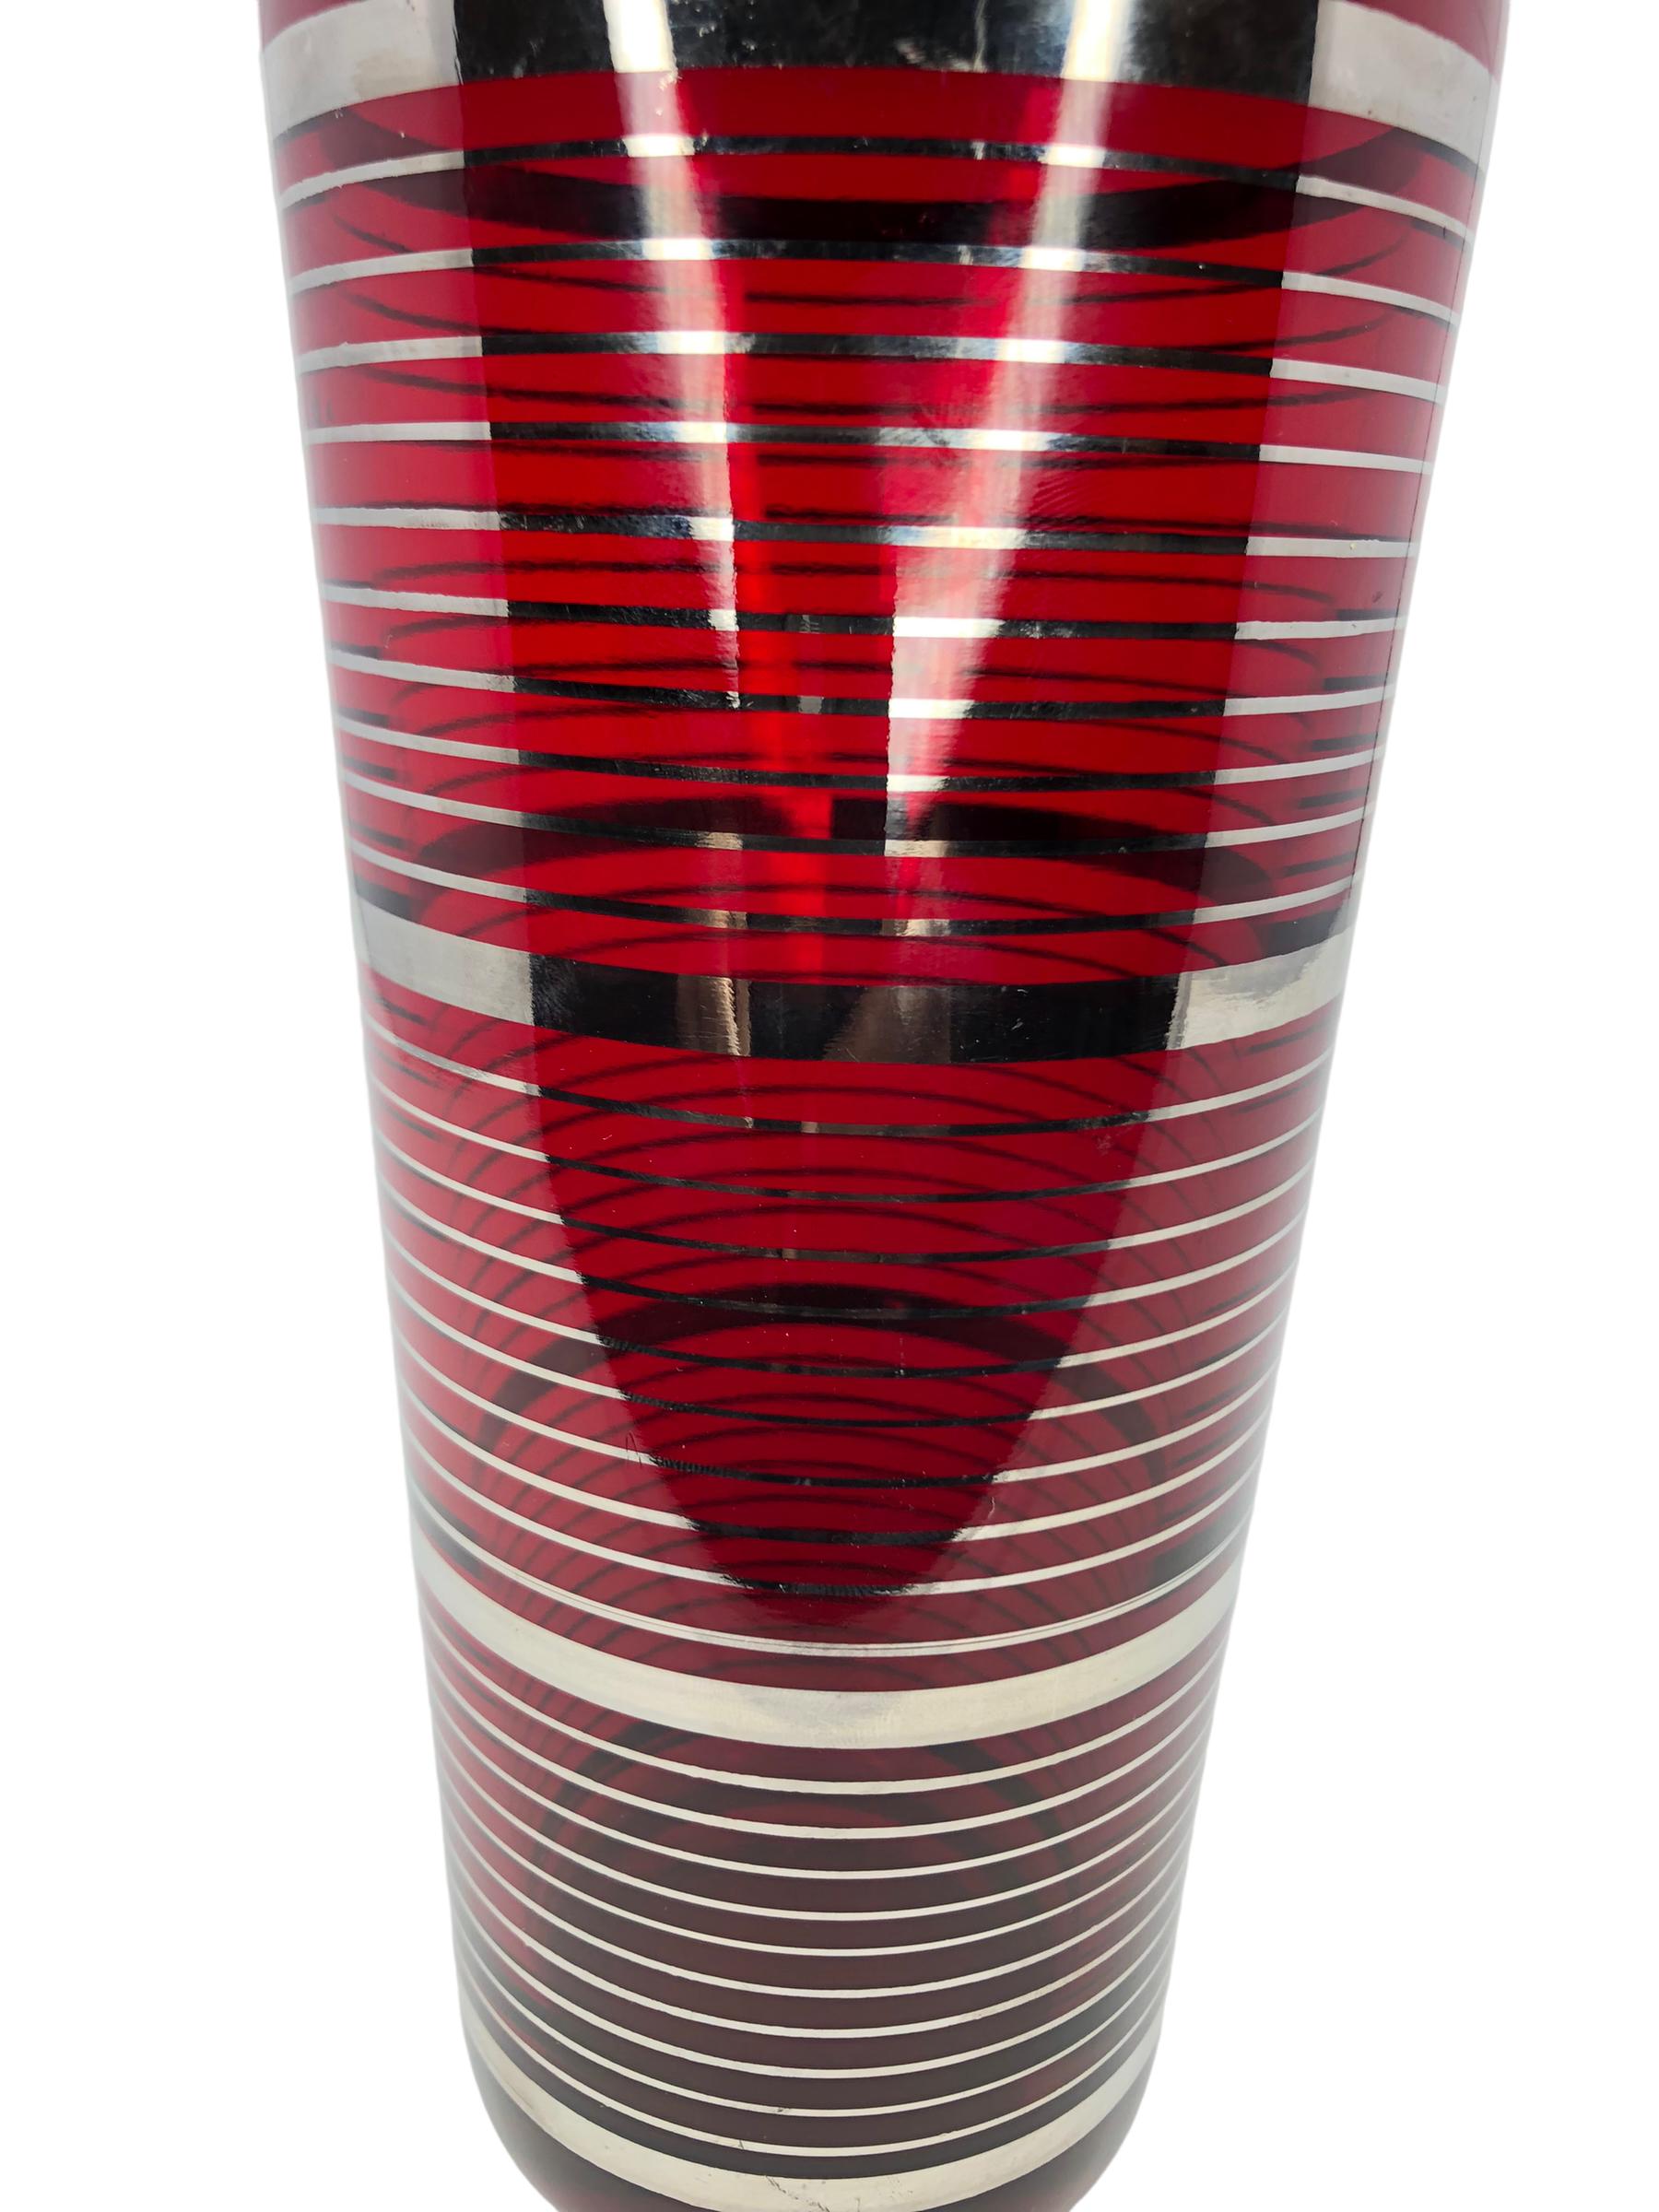 Art Deco Ruby Red Cocktail Shaker With Silver Bands And A Center Pour Chrome Lid. 